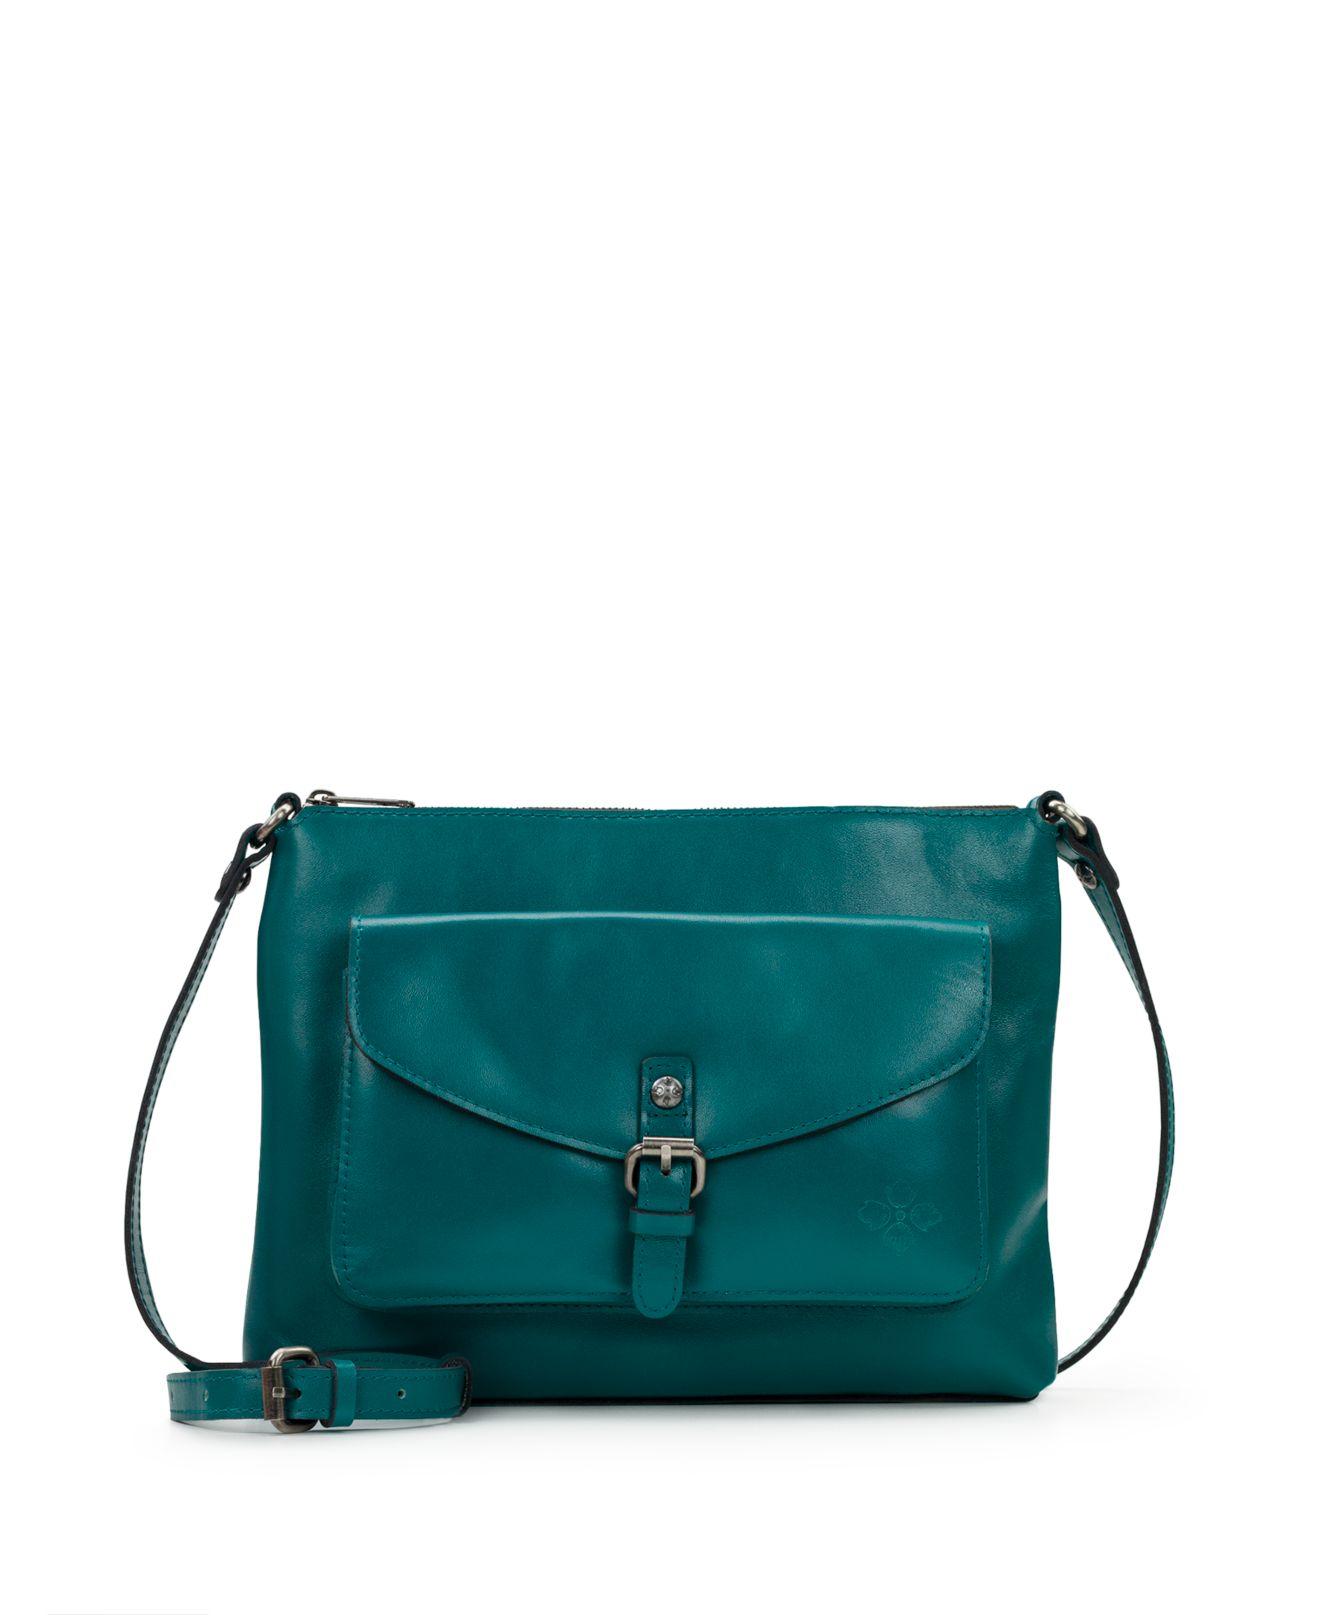 Patricia Nash Kirby East West Leather Crossbody - Macy's Exclusive in ...